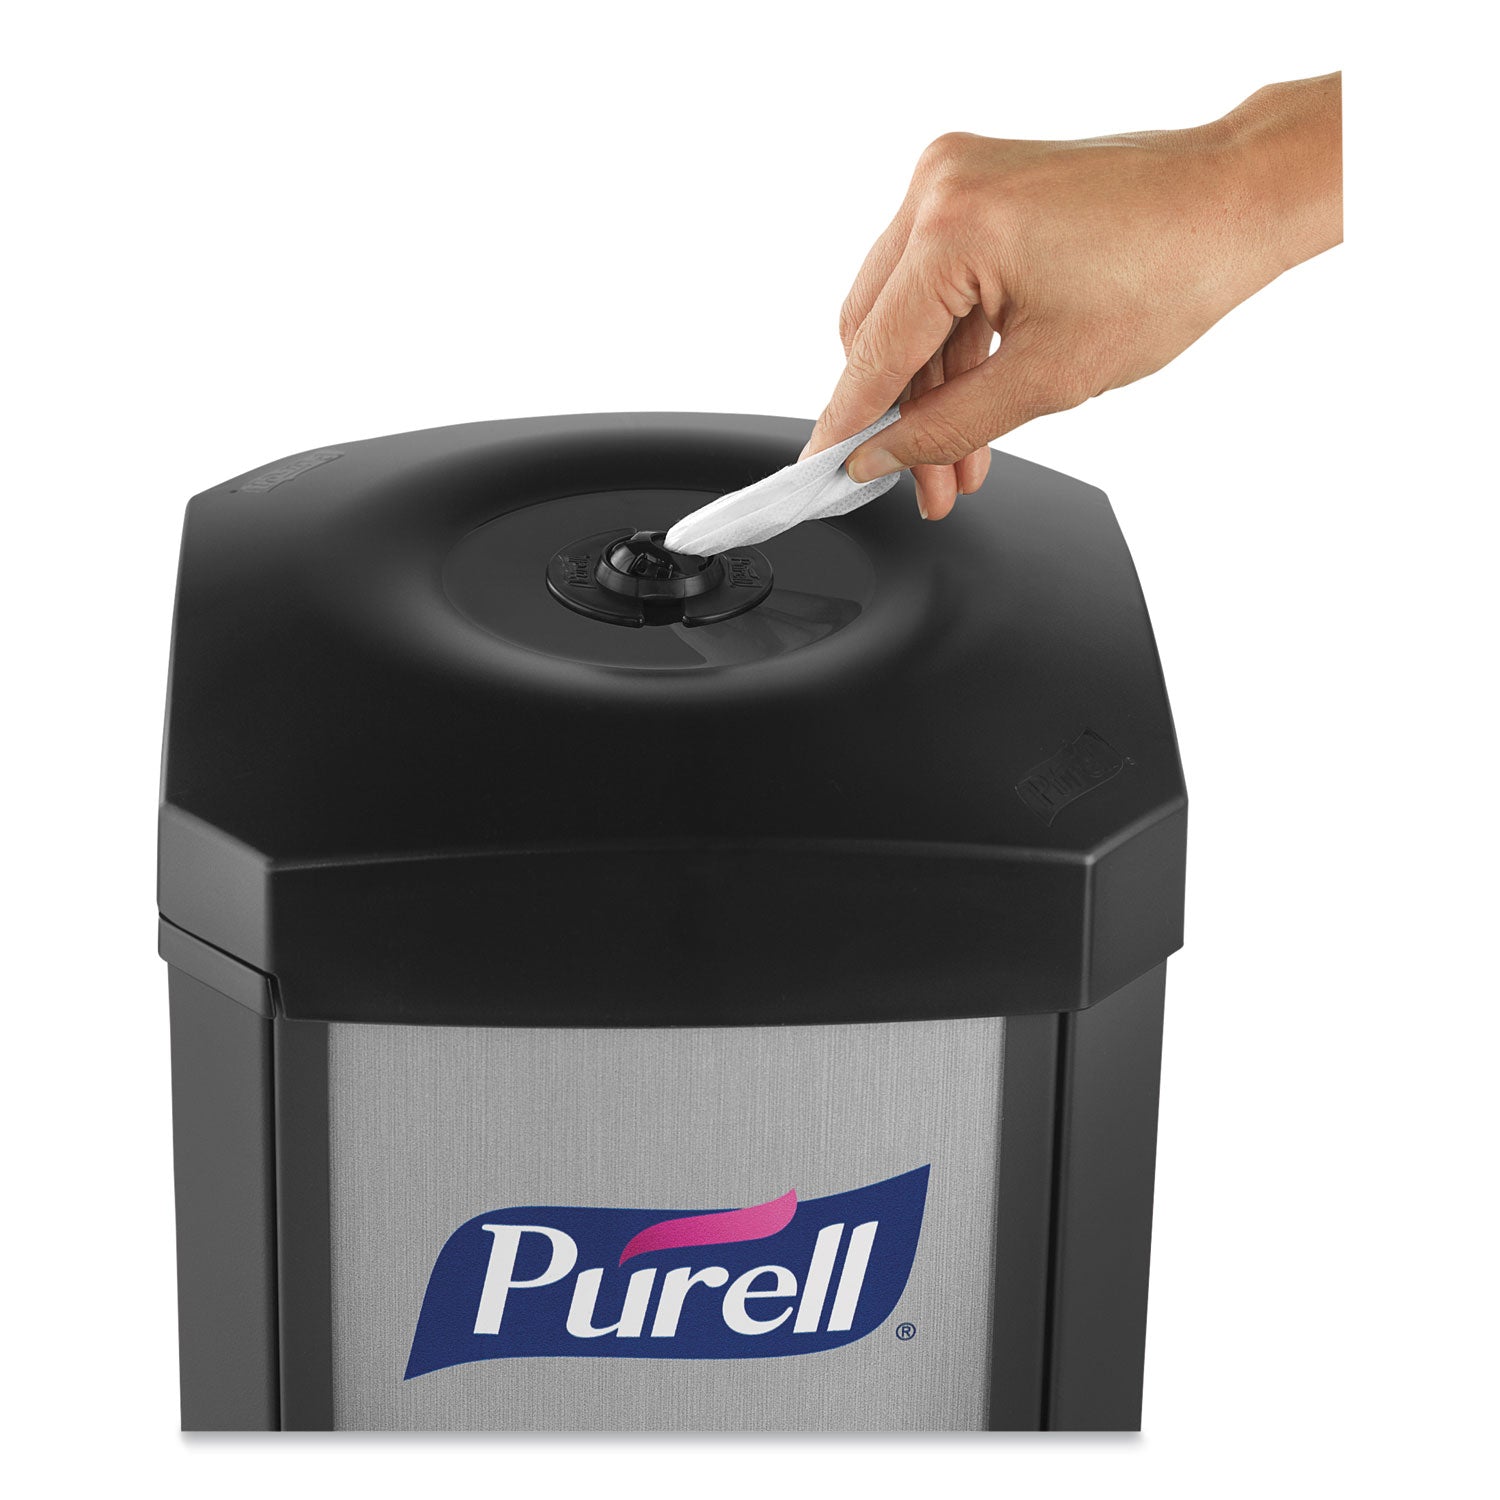 PURELL DS360 Hand Sanitizing Wipes Station - Steel - Black - Durable - 1 / Carton - 2